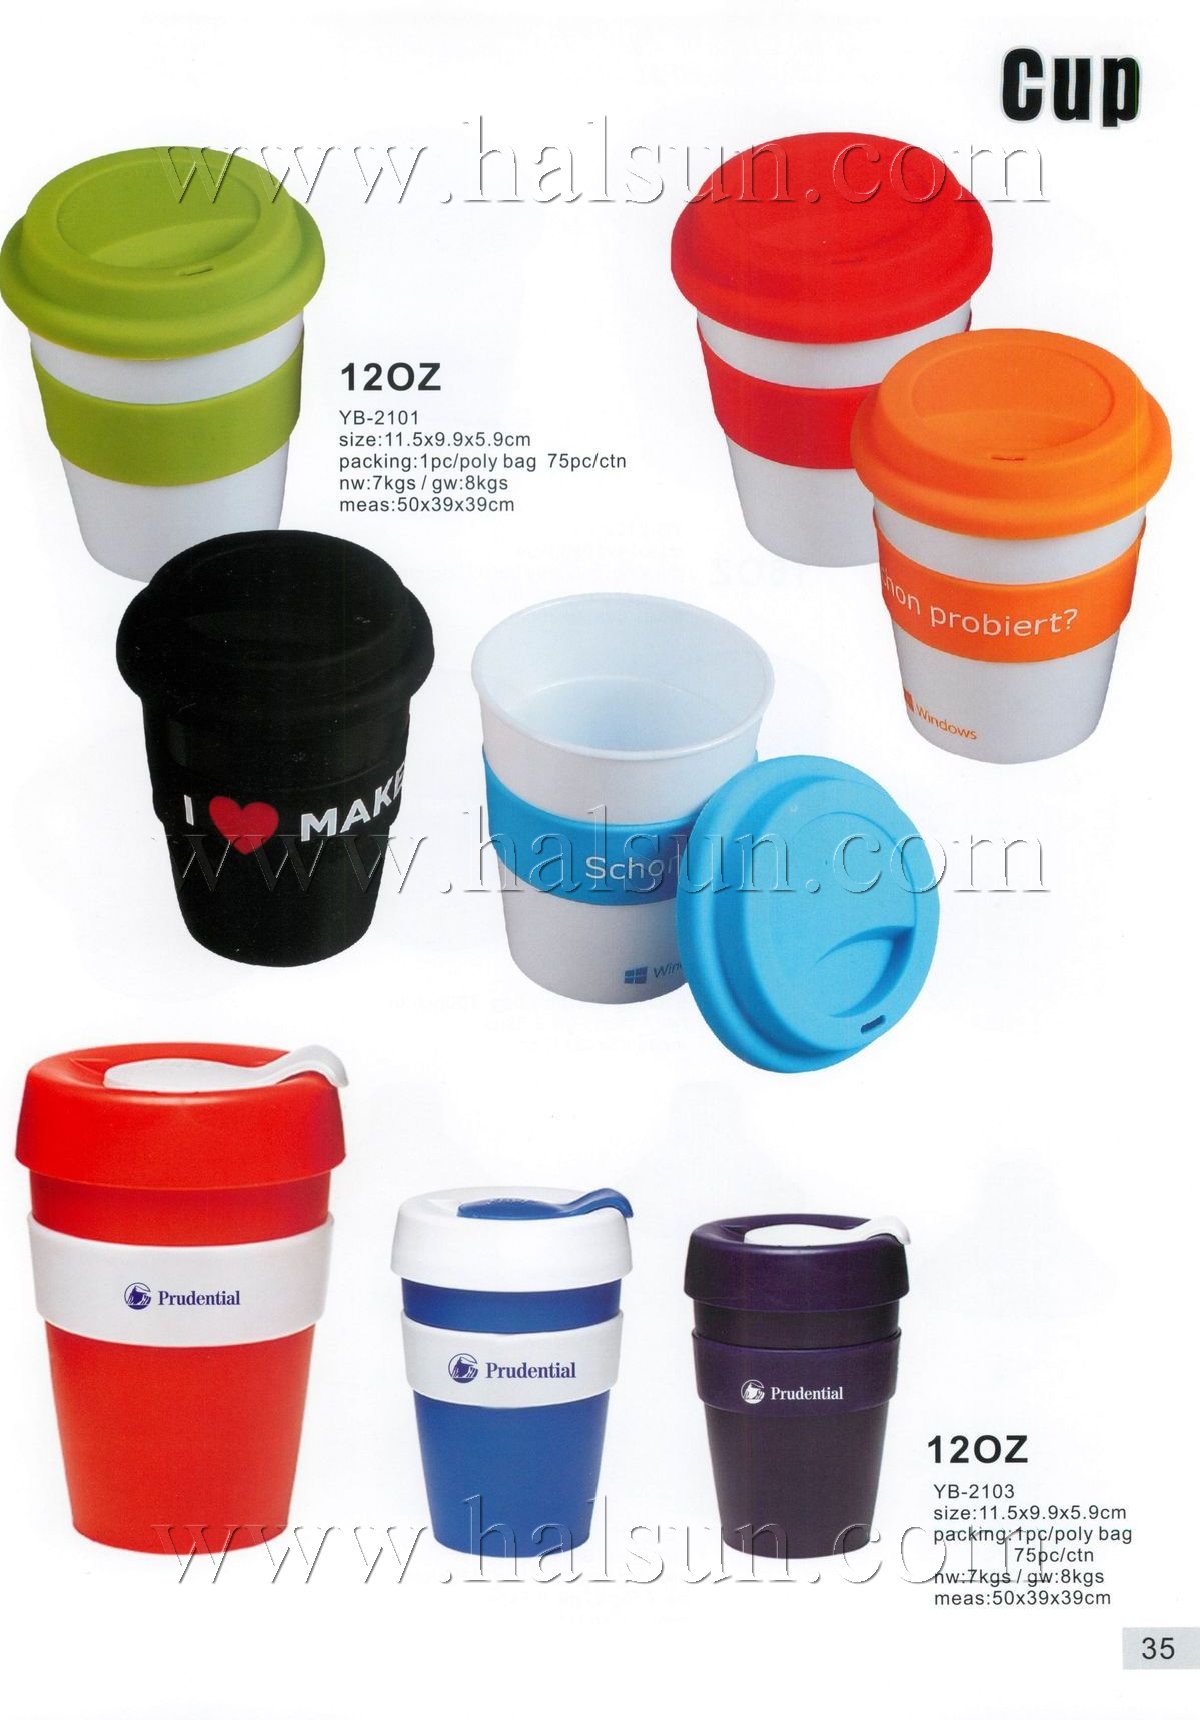 Insulated Cup With Lid,Indestructible Reusable Coffee Cup,12OZ,YB-2101,YB-2103